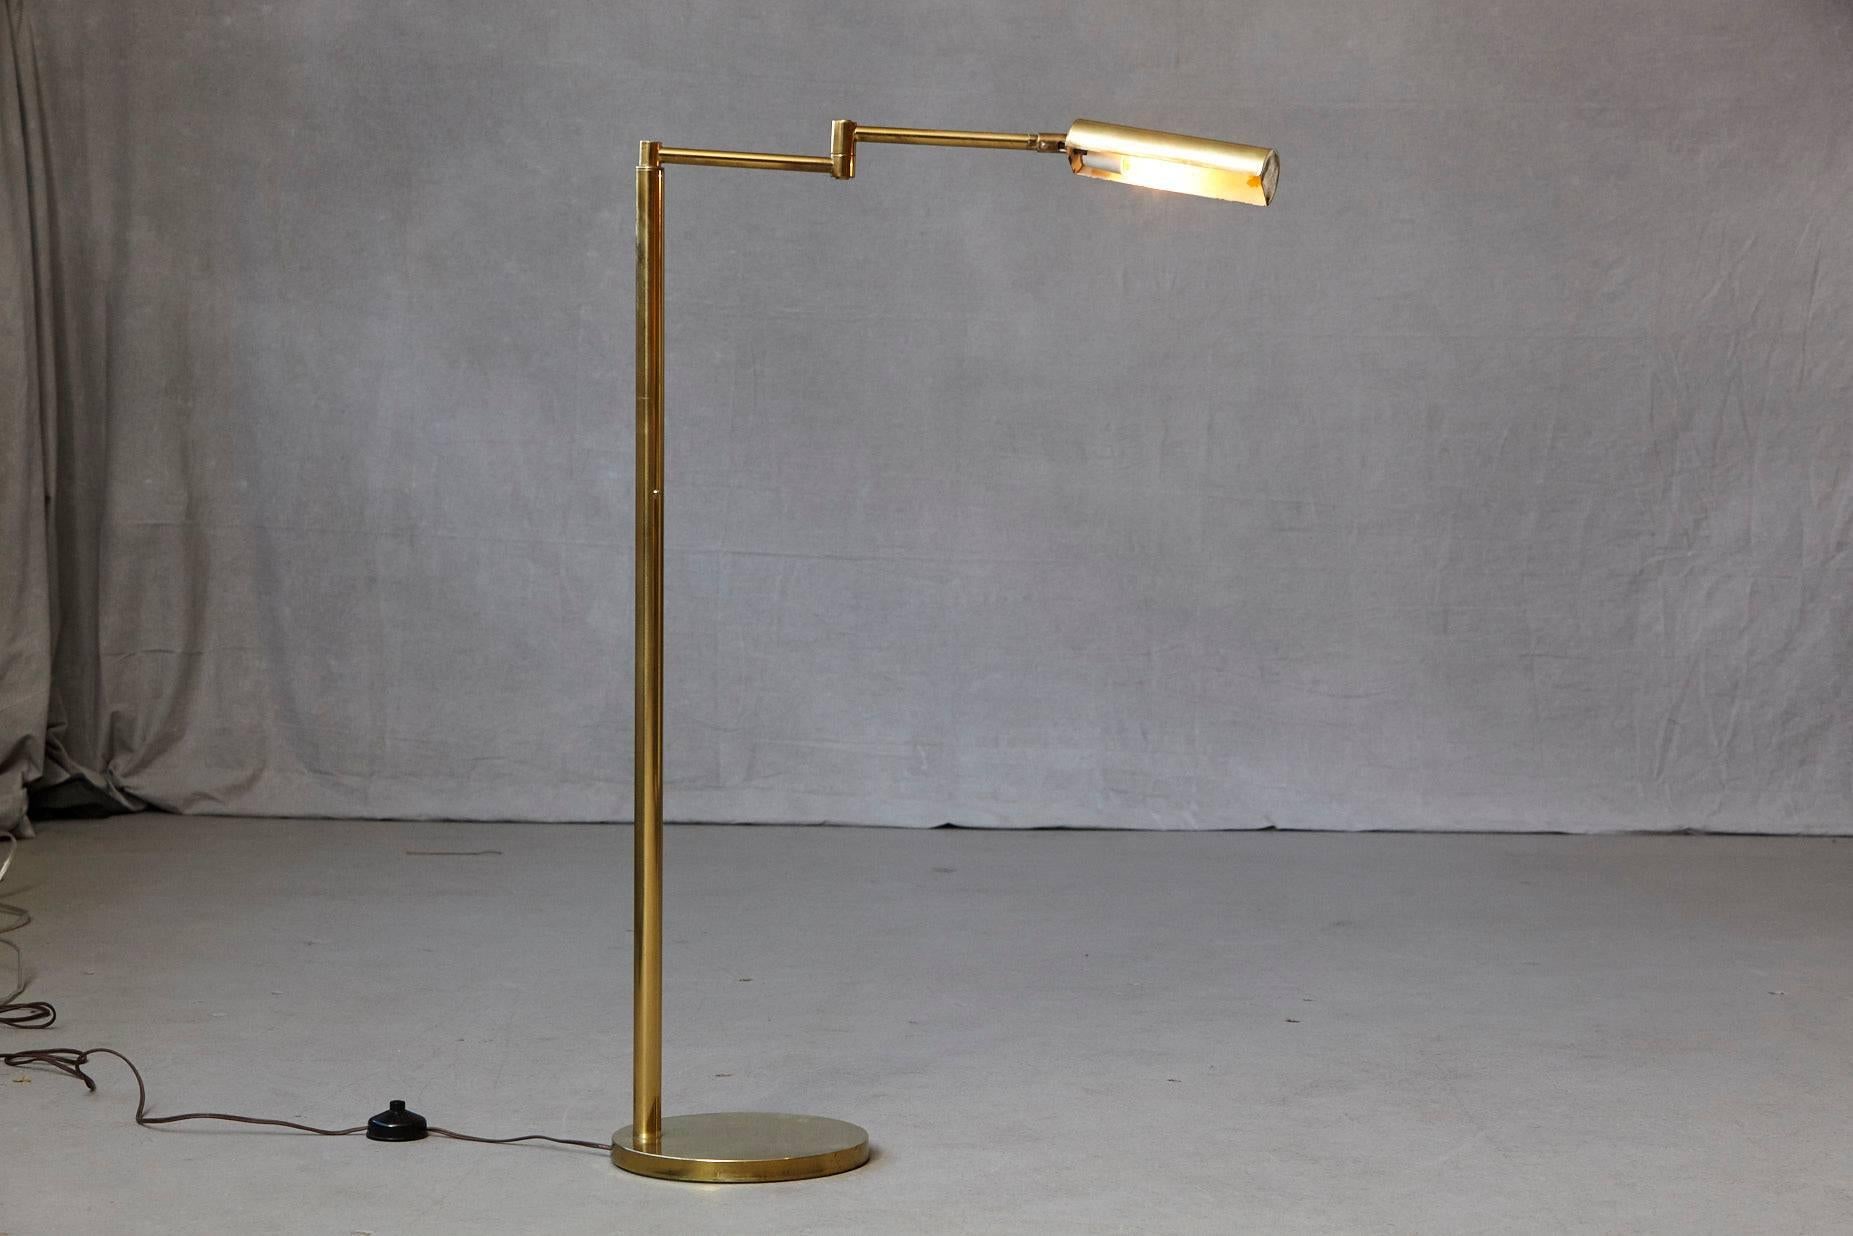 Height adjustable brass swing arm pharmacy floor lamp by Koch & Lowy.
Measure: Height from 41.5 in to 51.5 in
Some minor scratches to the round brass base, otherwise great patina. 
 